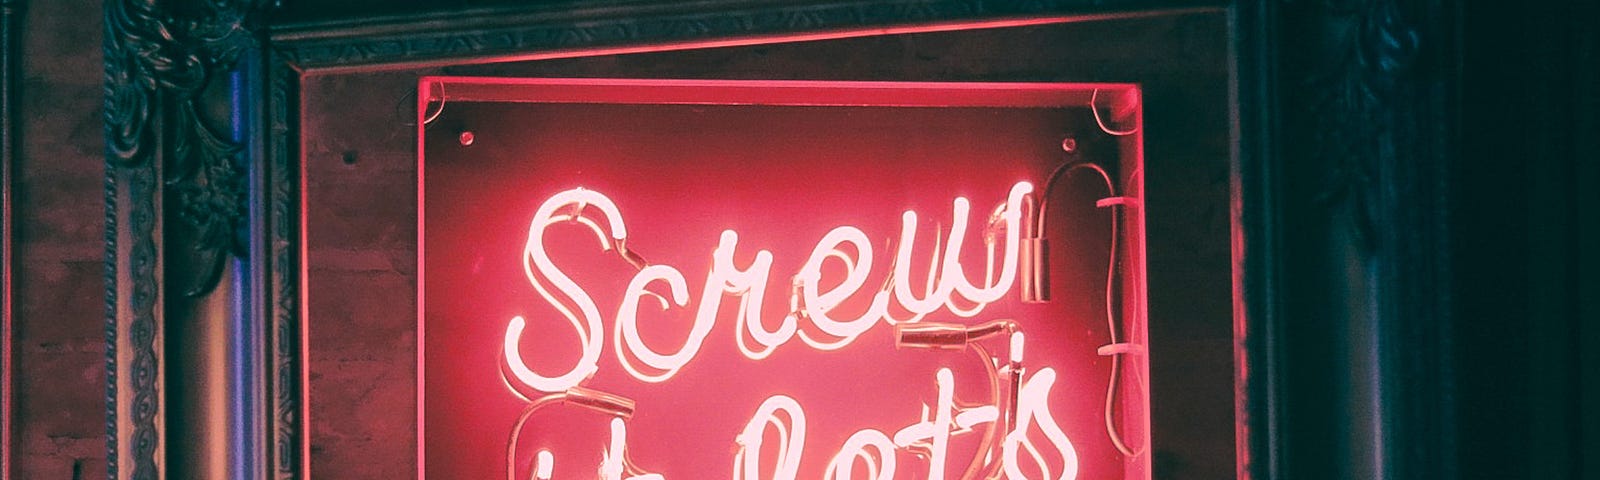 Neon sign with the words “Screw it, let’s do it” emblazoned in red.